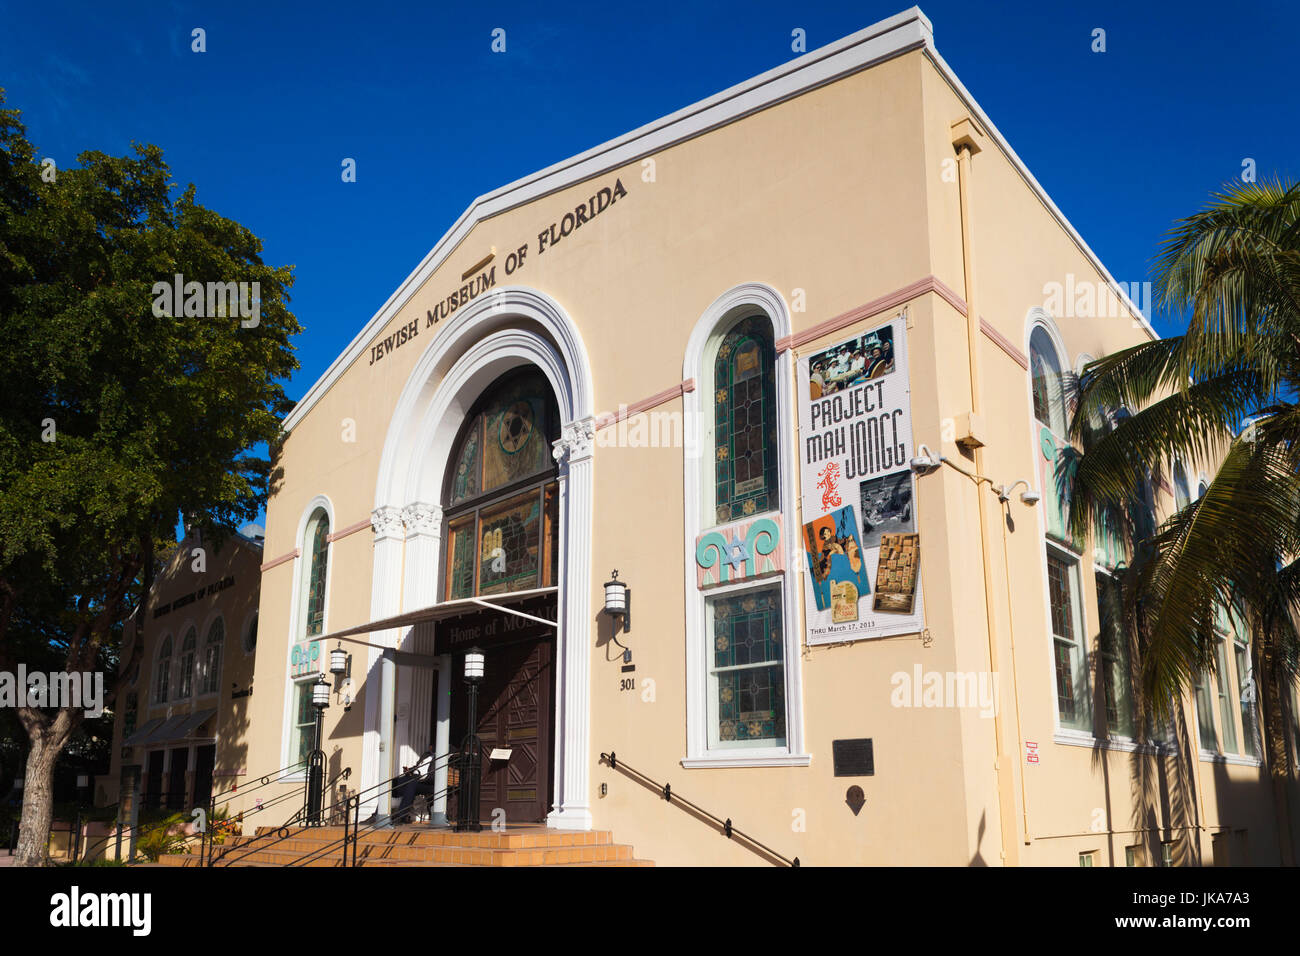 USA, Florida, Miami Beach, South Beach, Jewish Museum of Florida, located in former synagogue, exterior Stock Photo